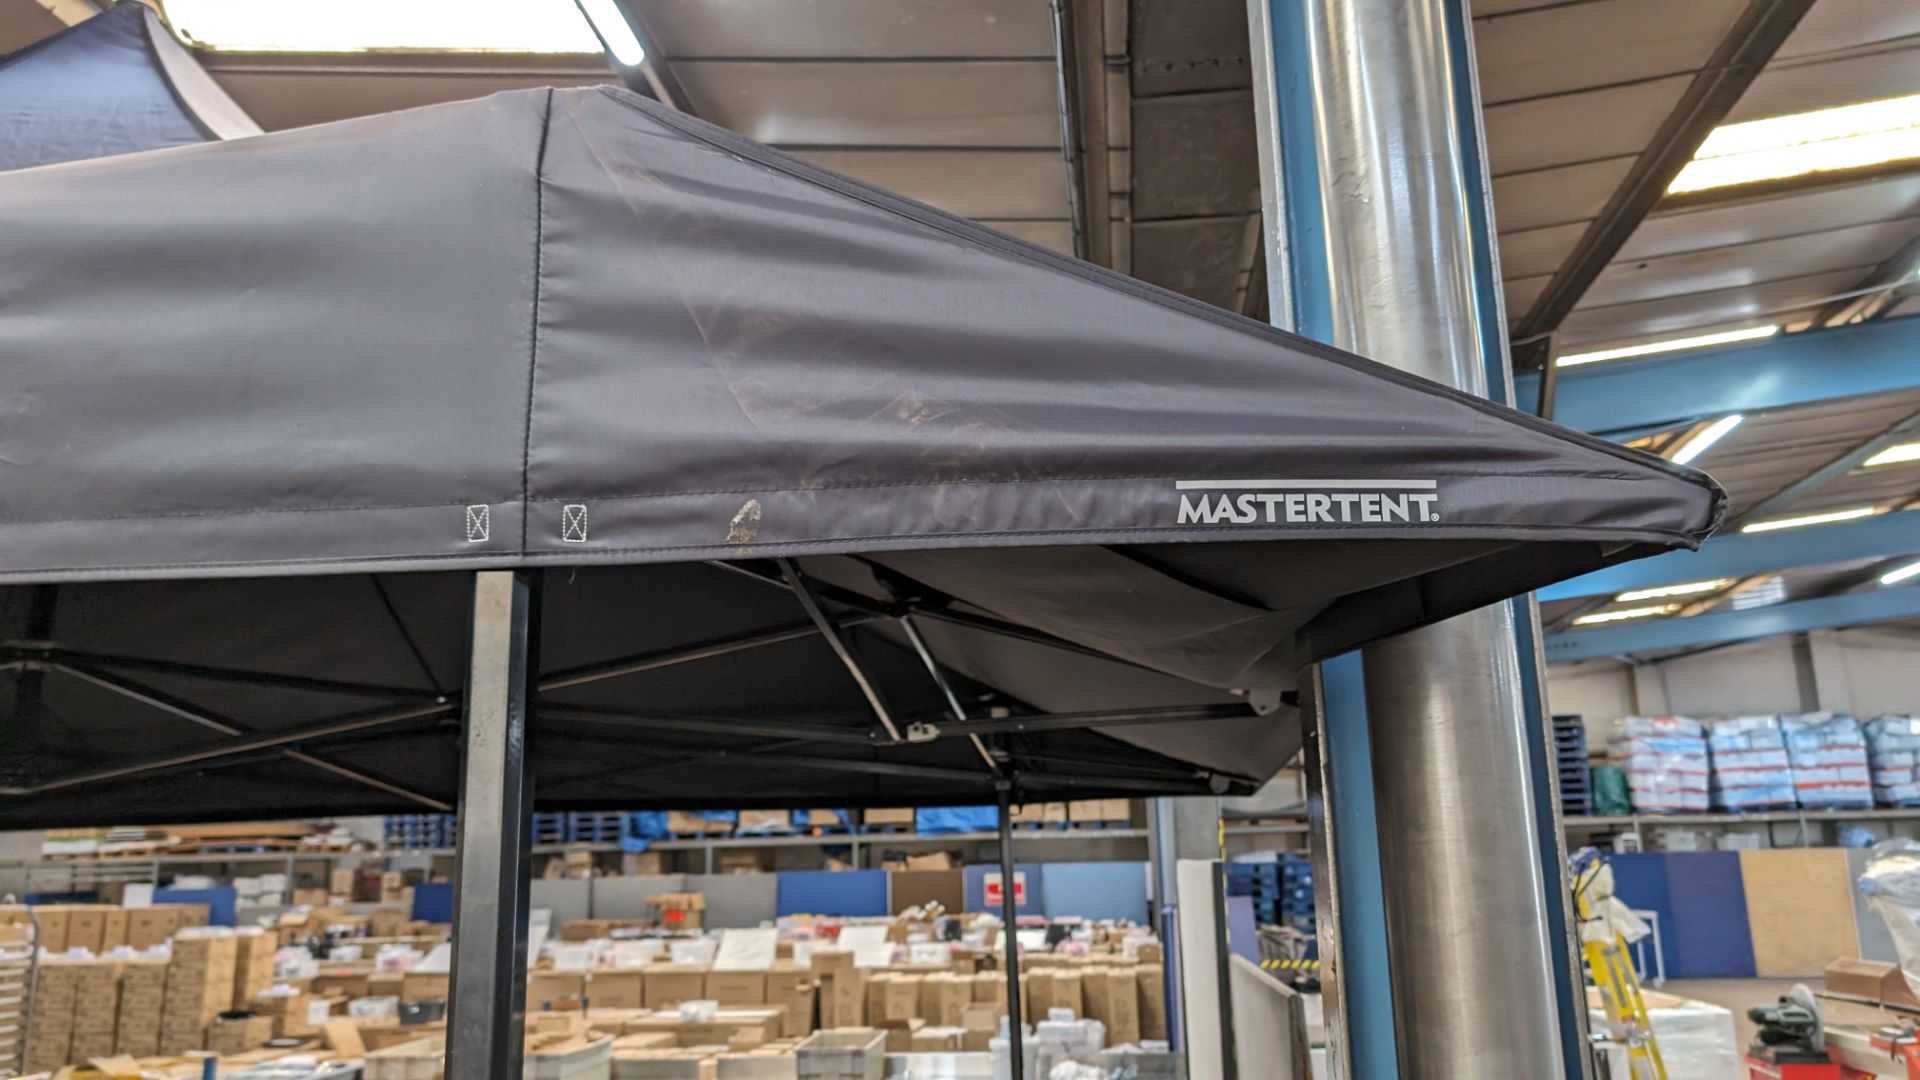 Mastertent 4m x 4m canopy tent (gazebo), bought new in May 2022 for approximately £3,600. This item - Image 7 of 14